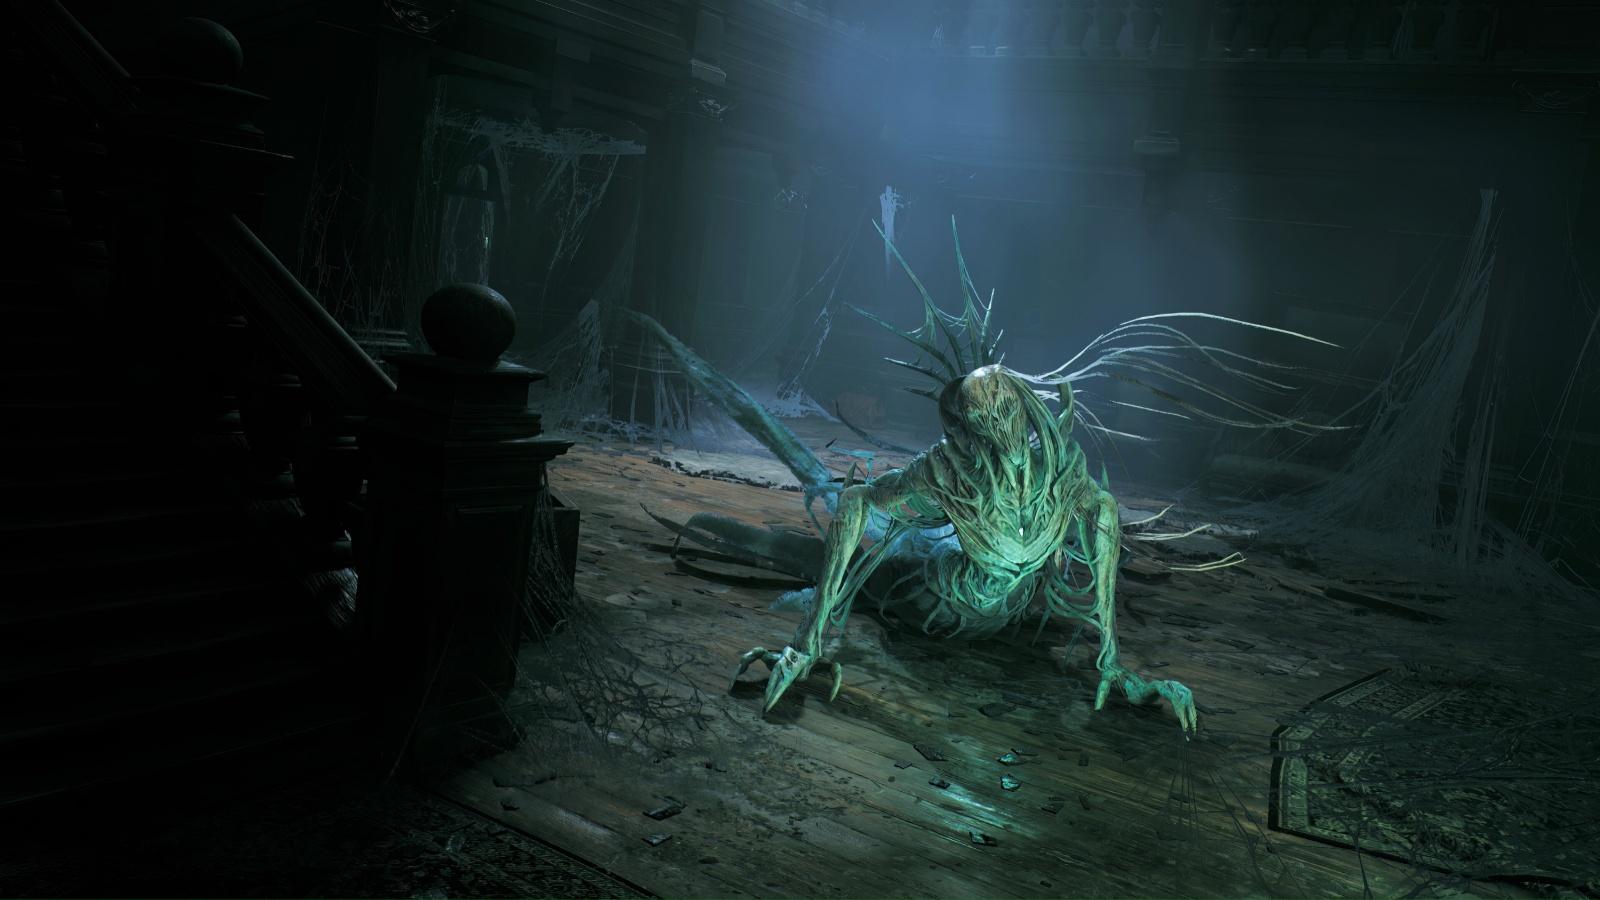 A screenshot from the game Remnant 2